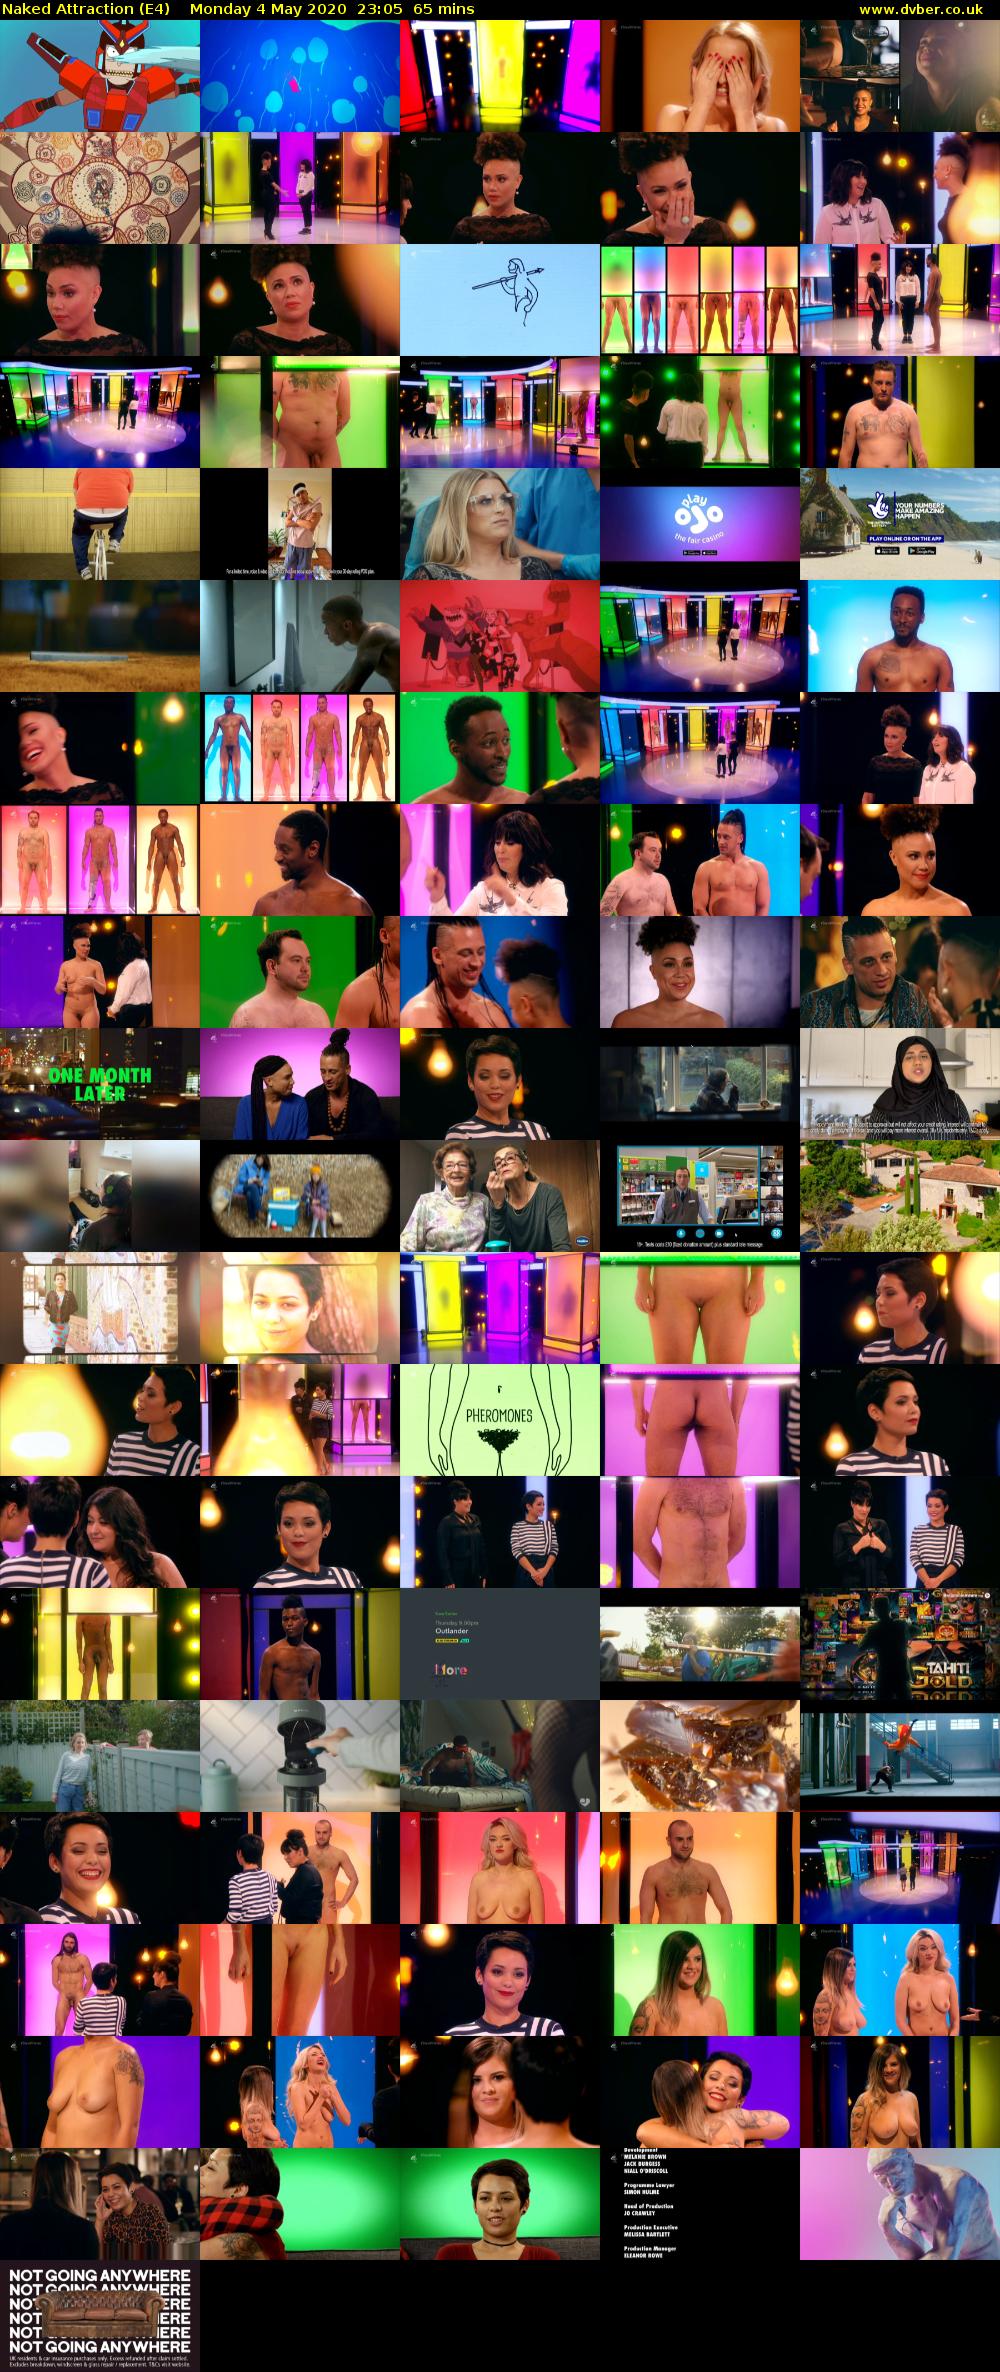 Naked Attraction (E4) Monday 4 May 2020 23:05 - 00:10